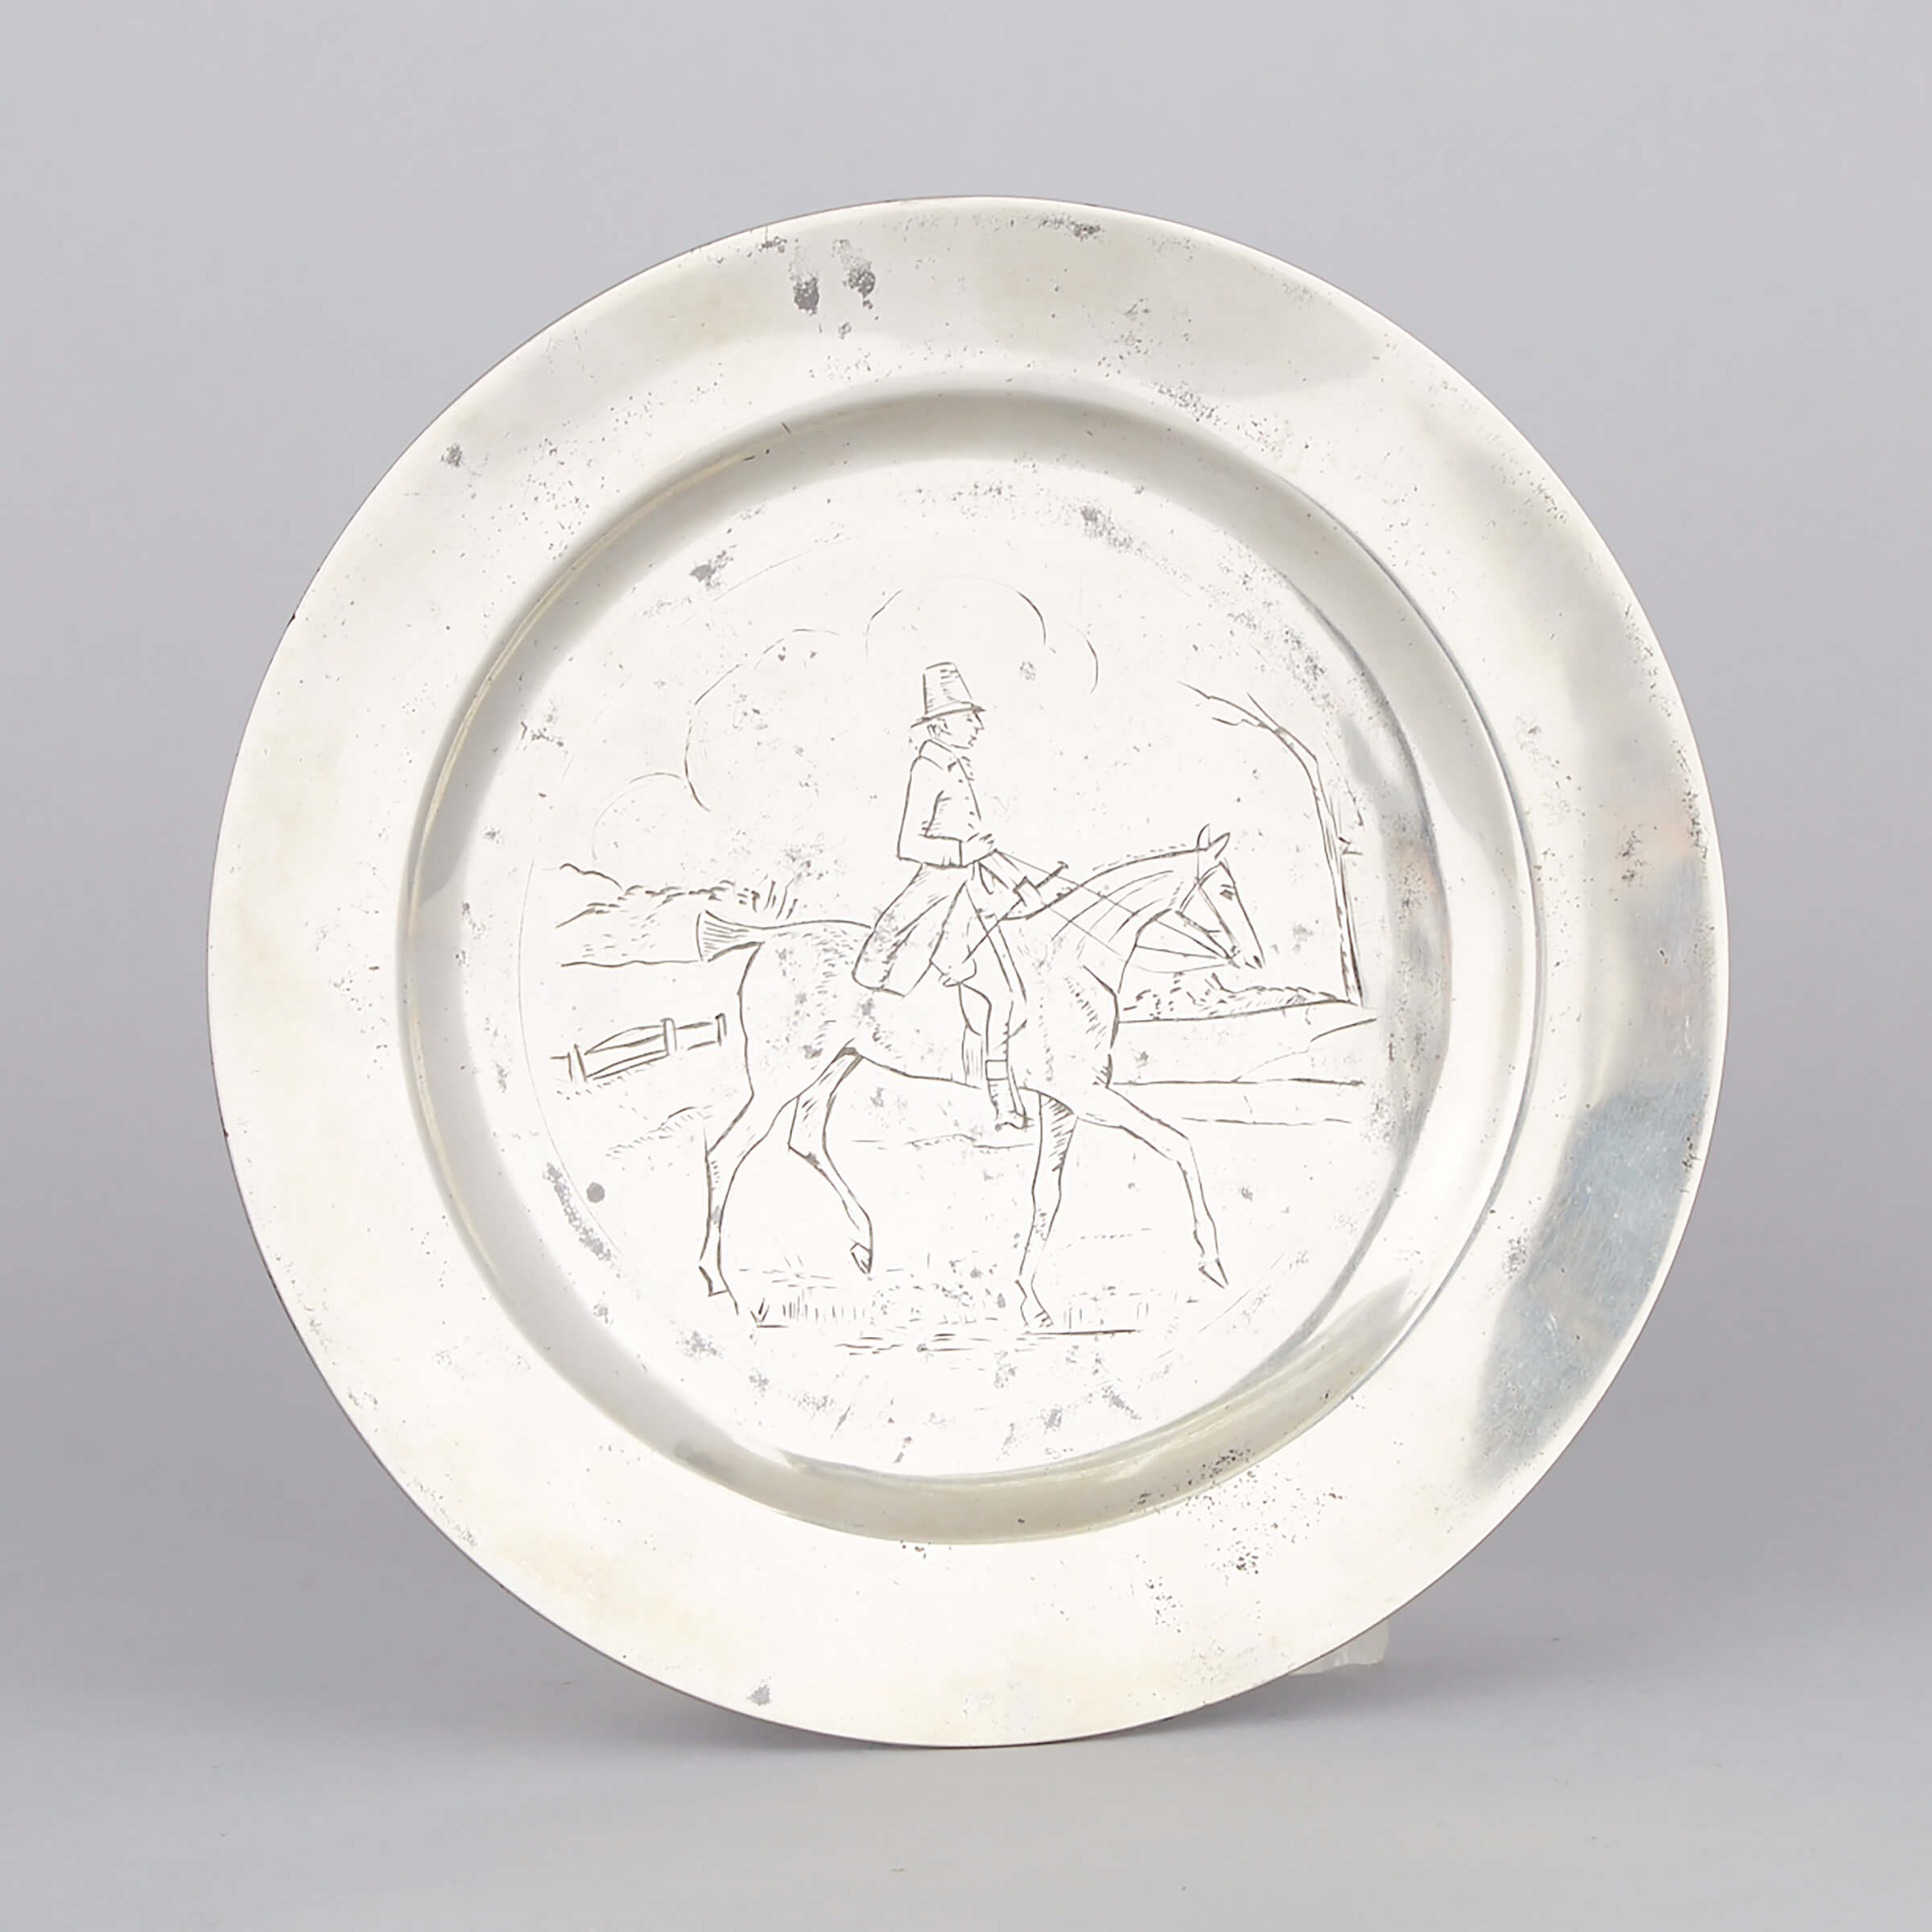 English Pewter Engraved Plate, William Cook, Bristol, c.1800